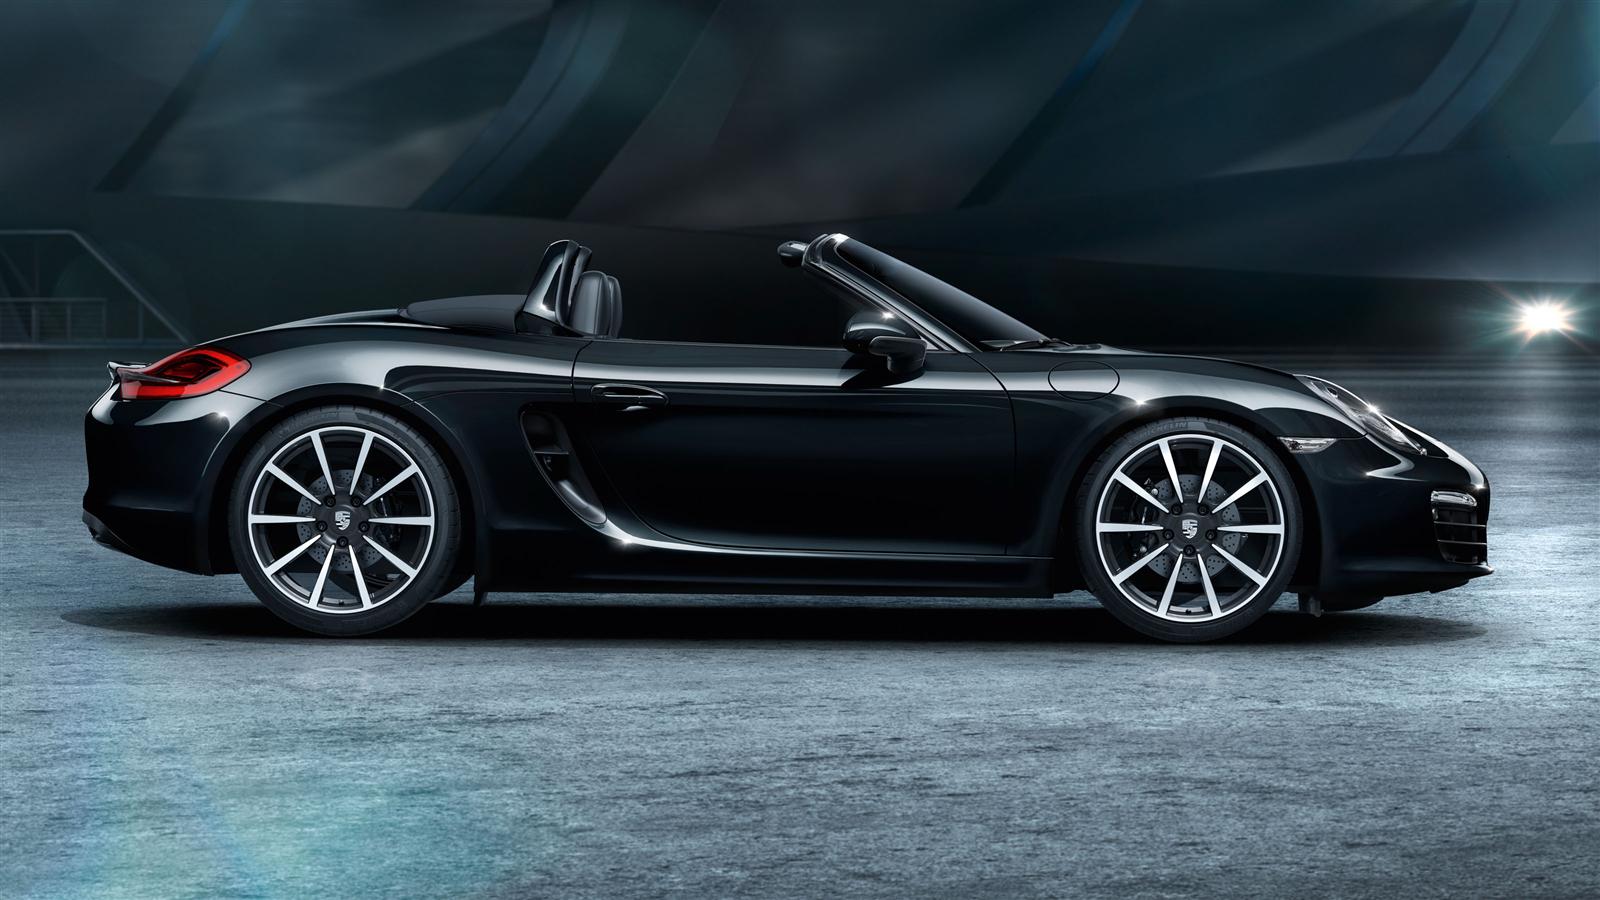 Porsche Boxster and 911 Black Editions revealed | Motoroids